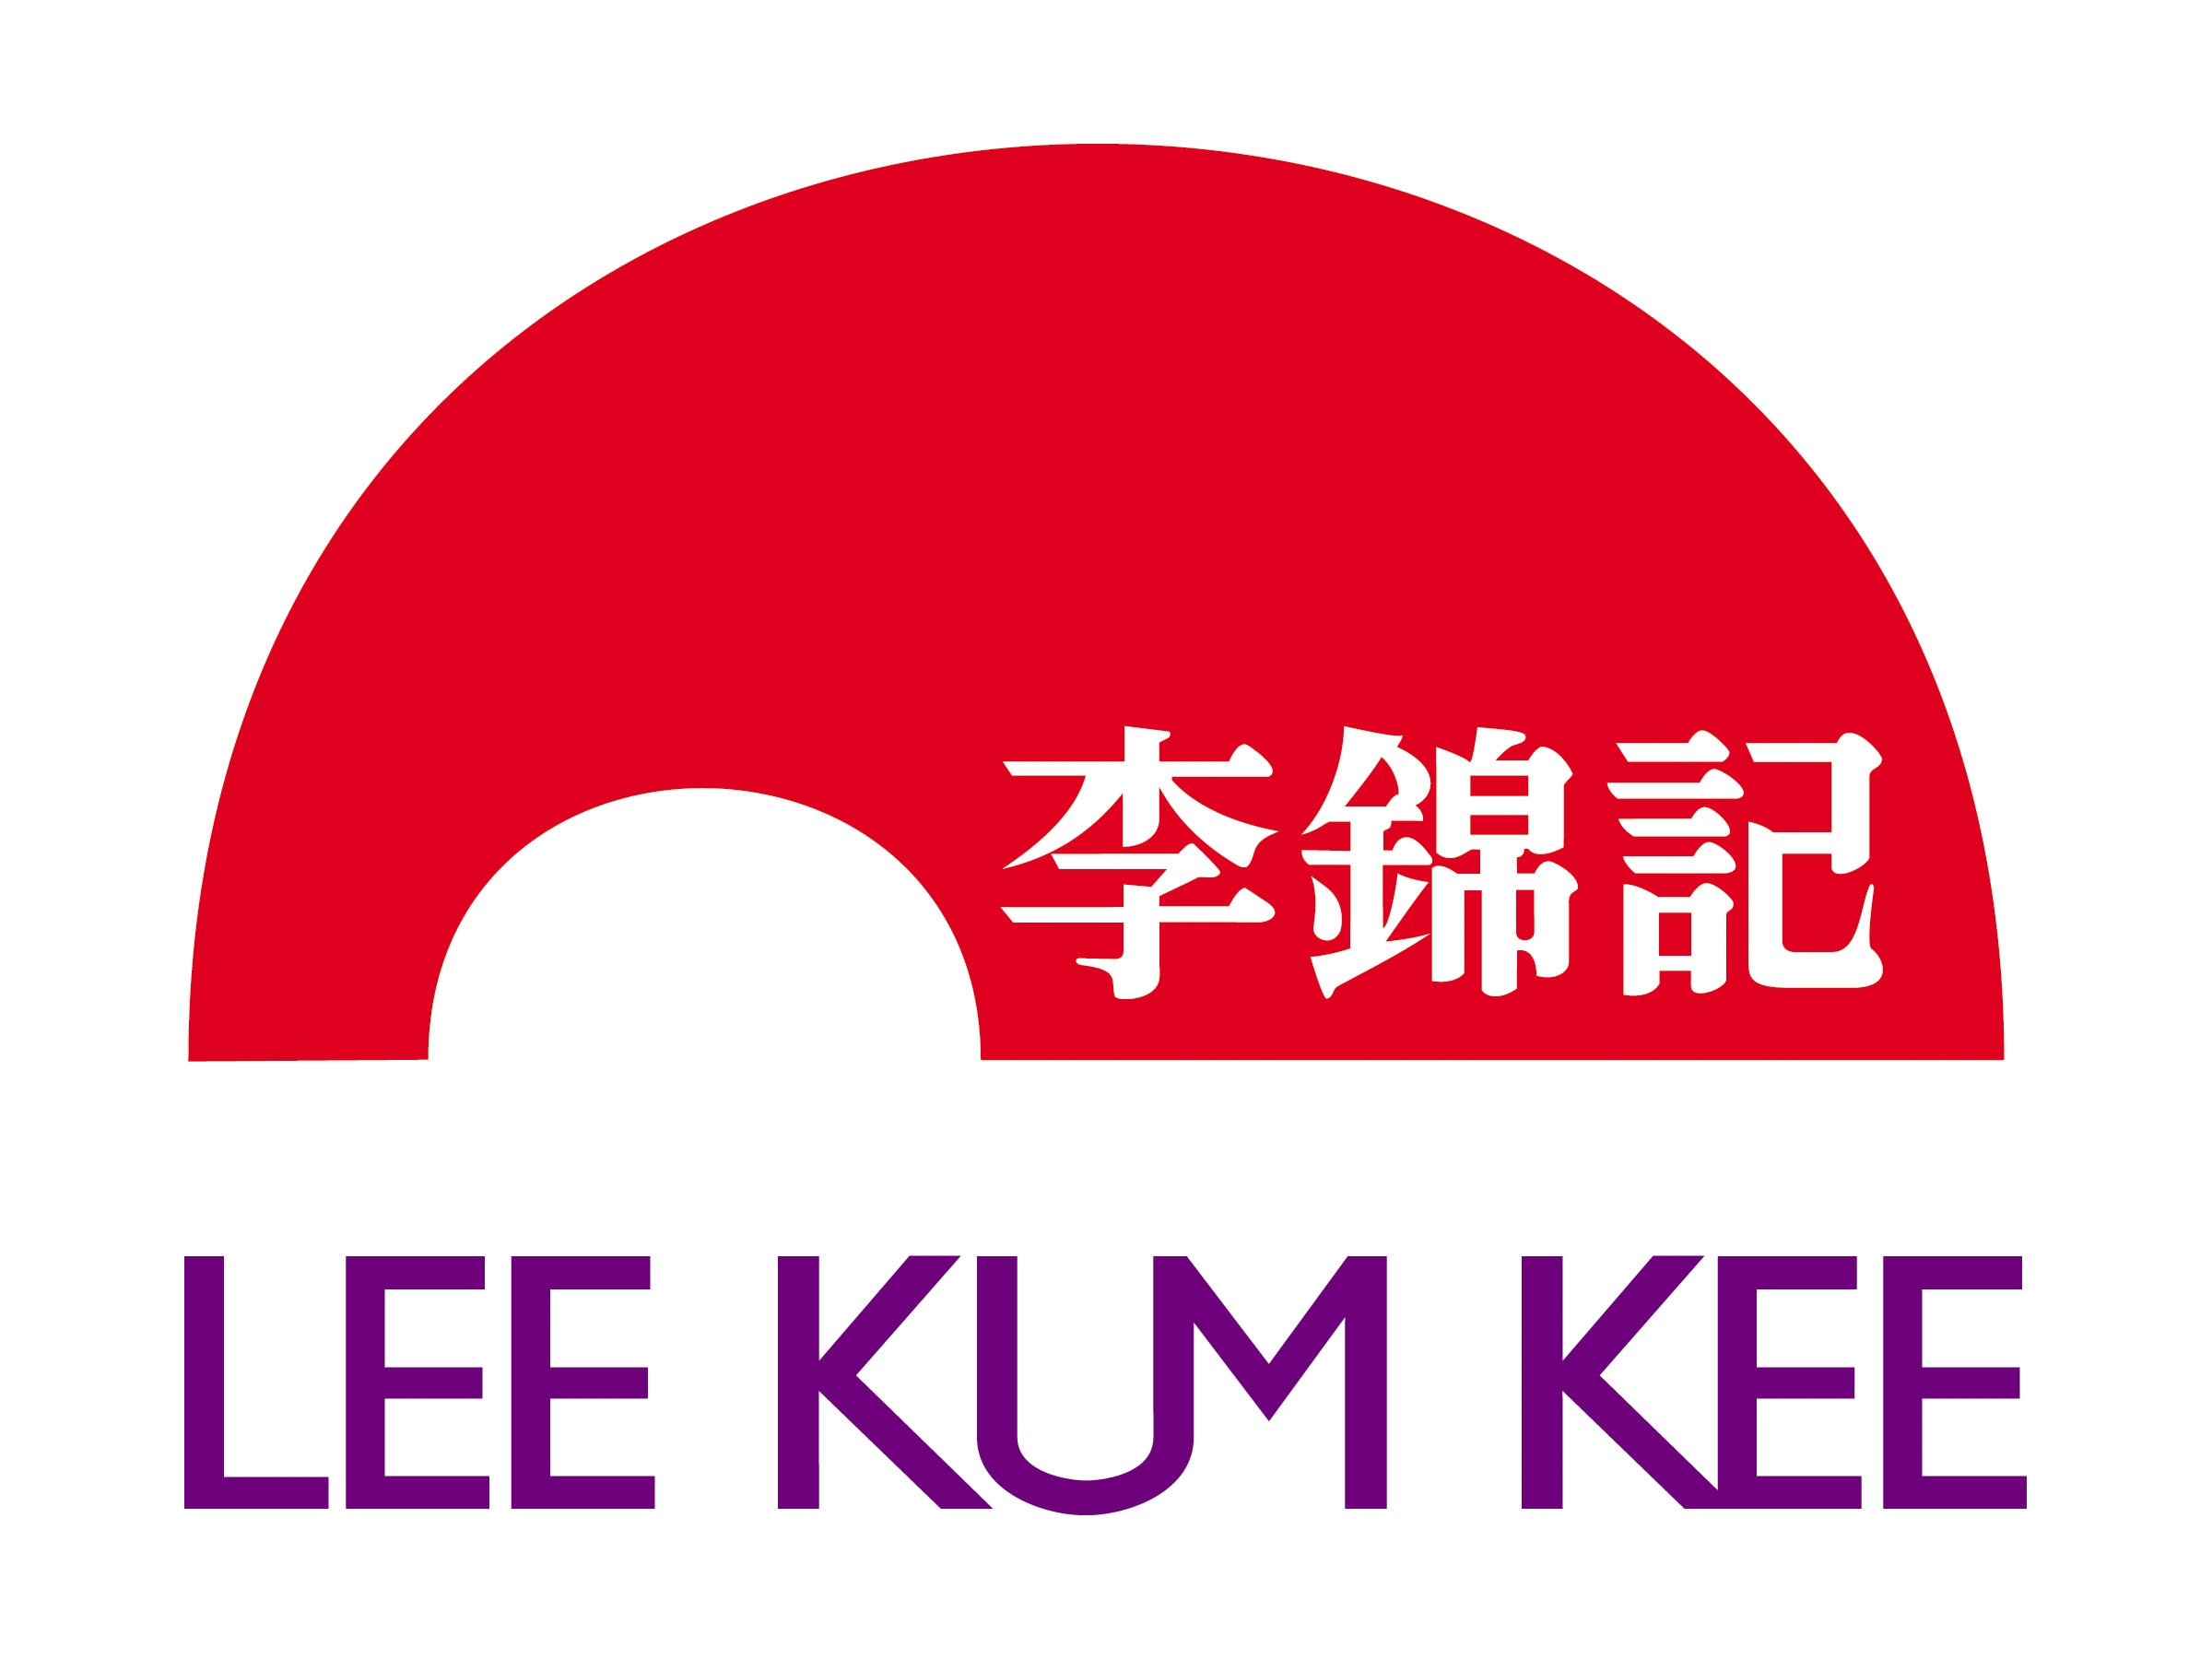 Lee kum kee products reviews 